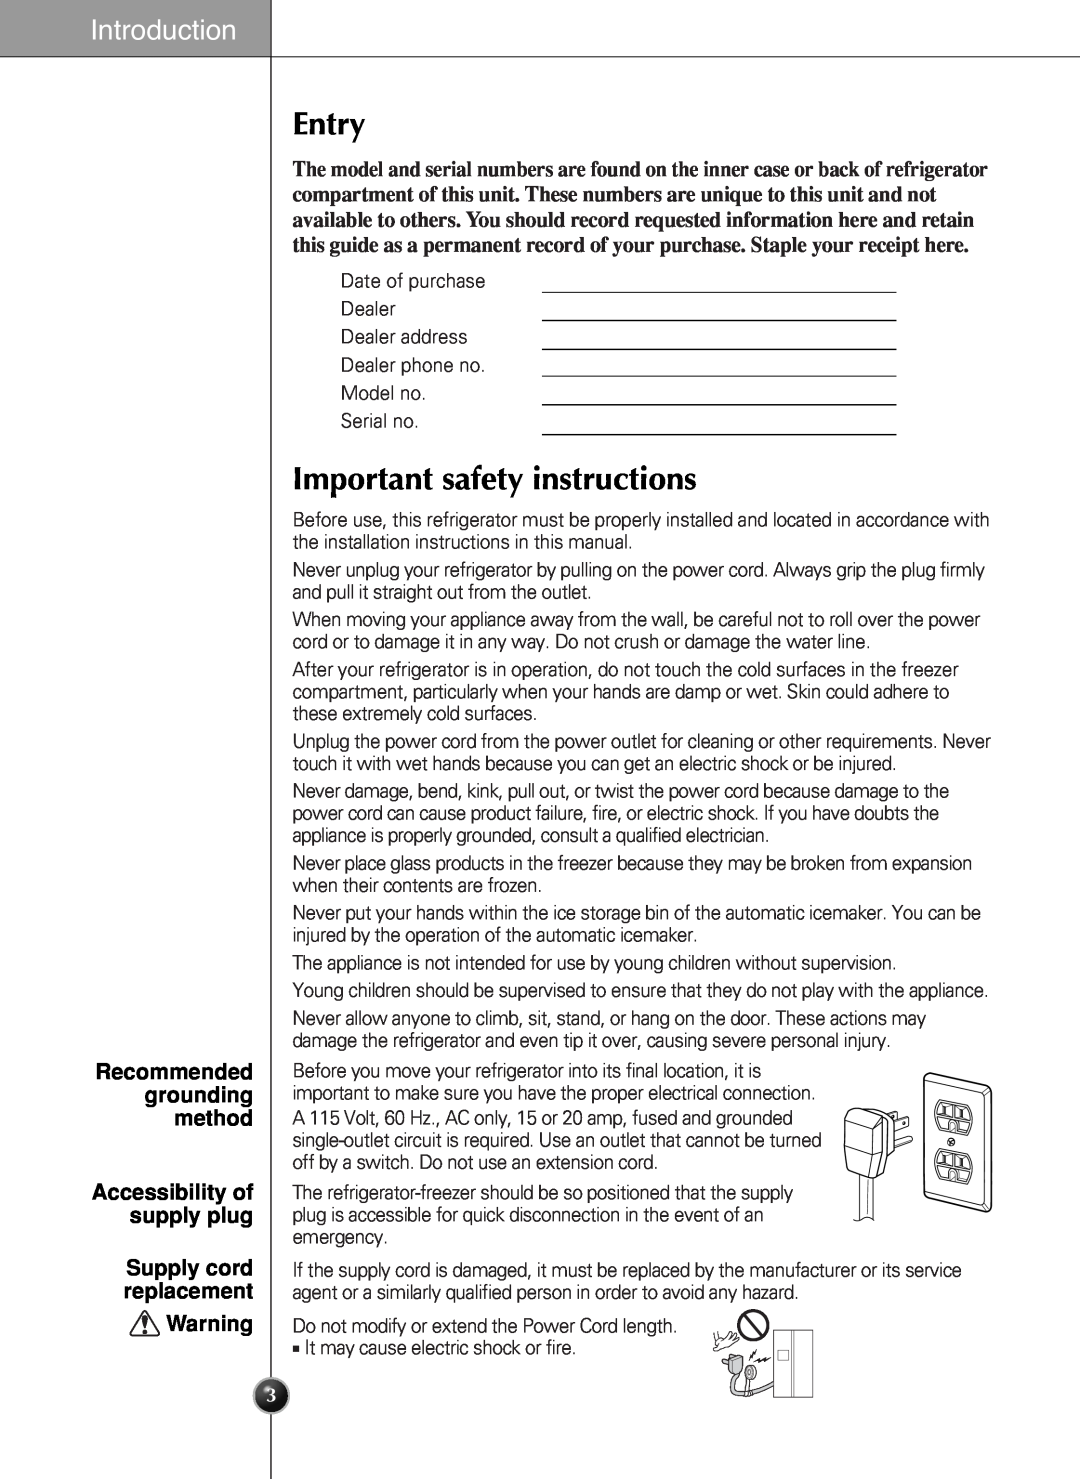 LG Electronics LSC 21943ST manual Entry, Important safety instructions, Introduction 